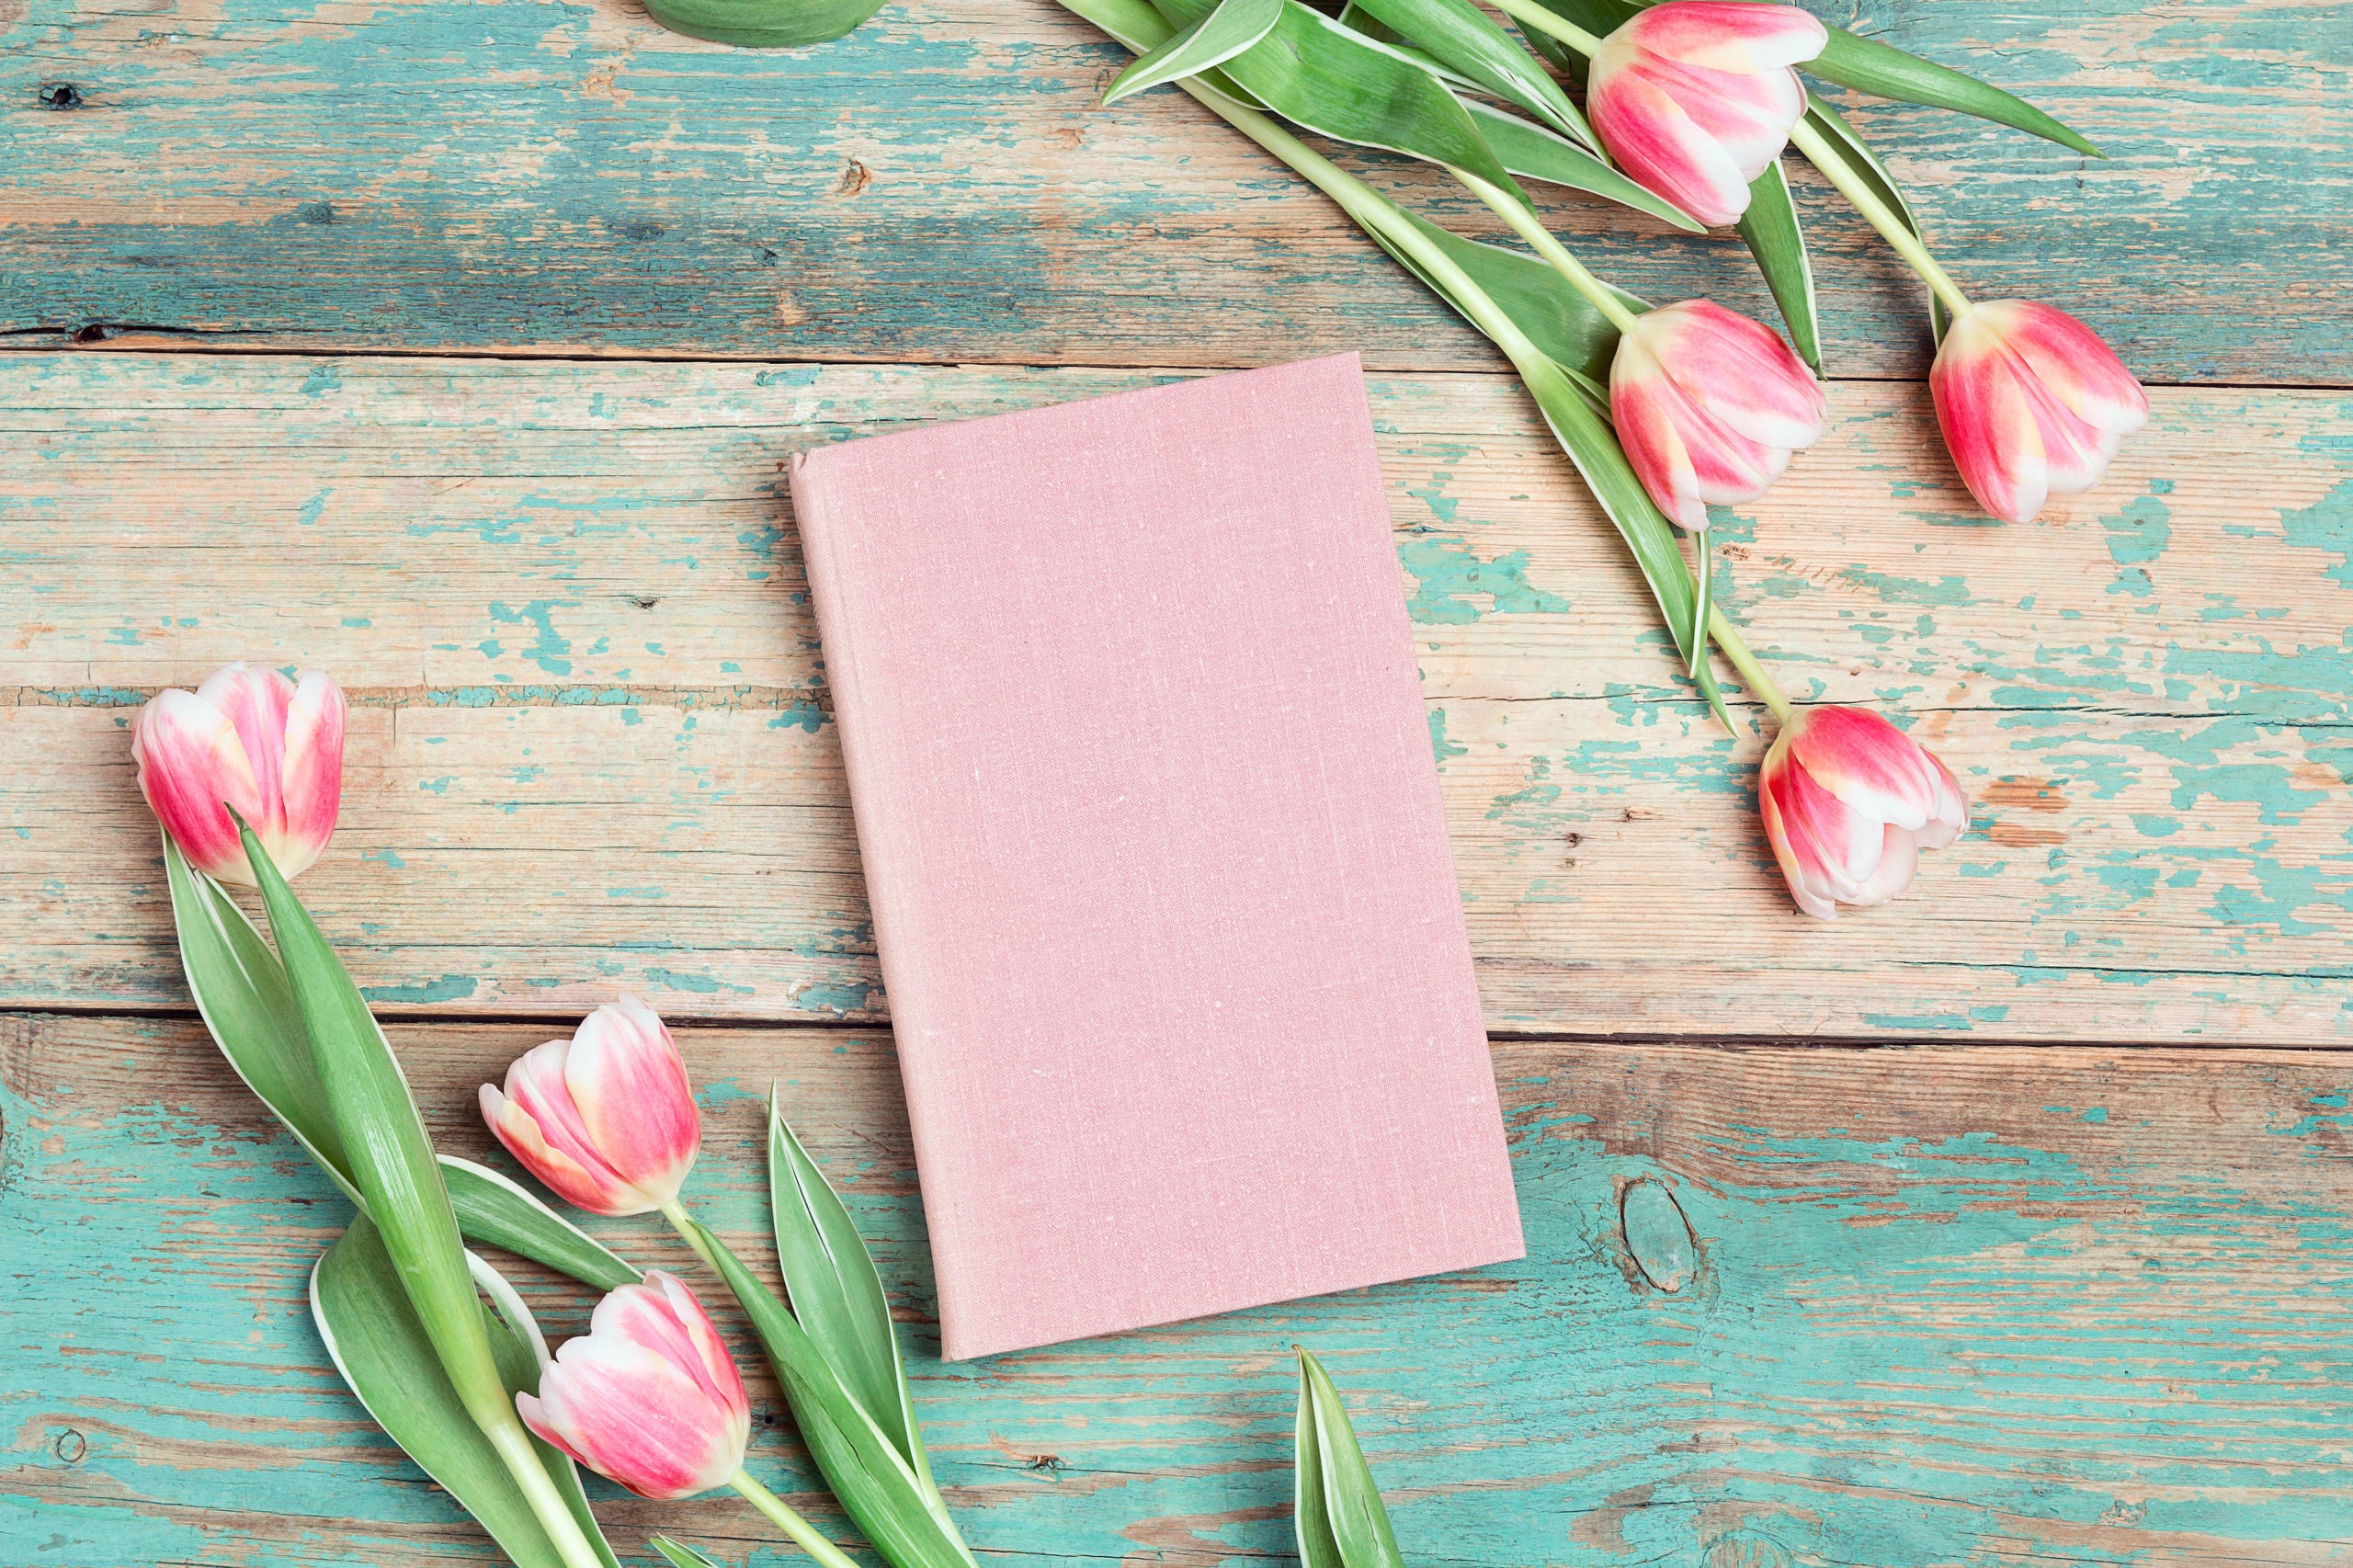 Tulip flowers and pink book on vintage wooden table.